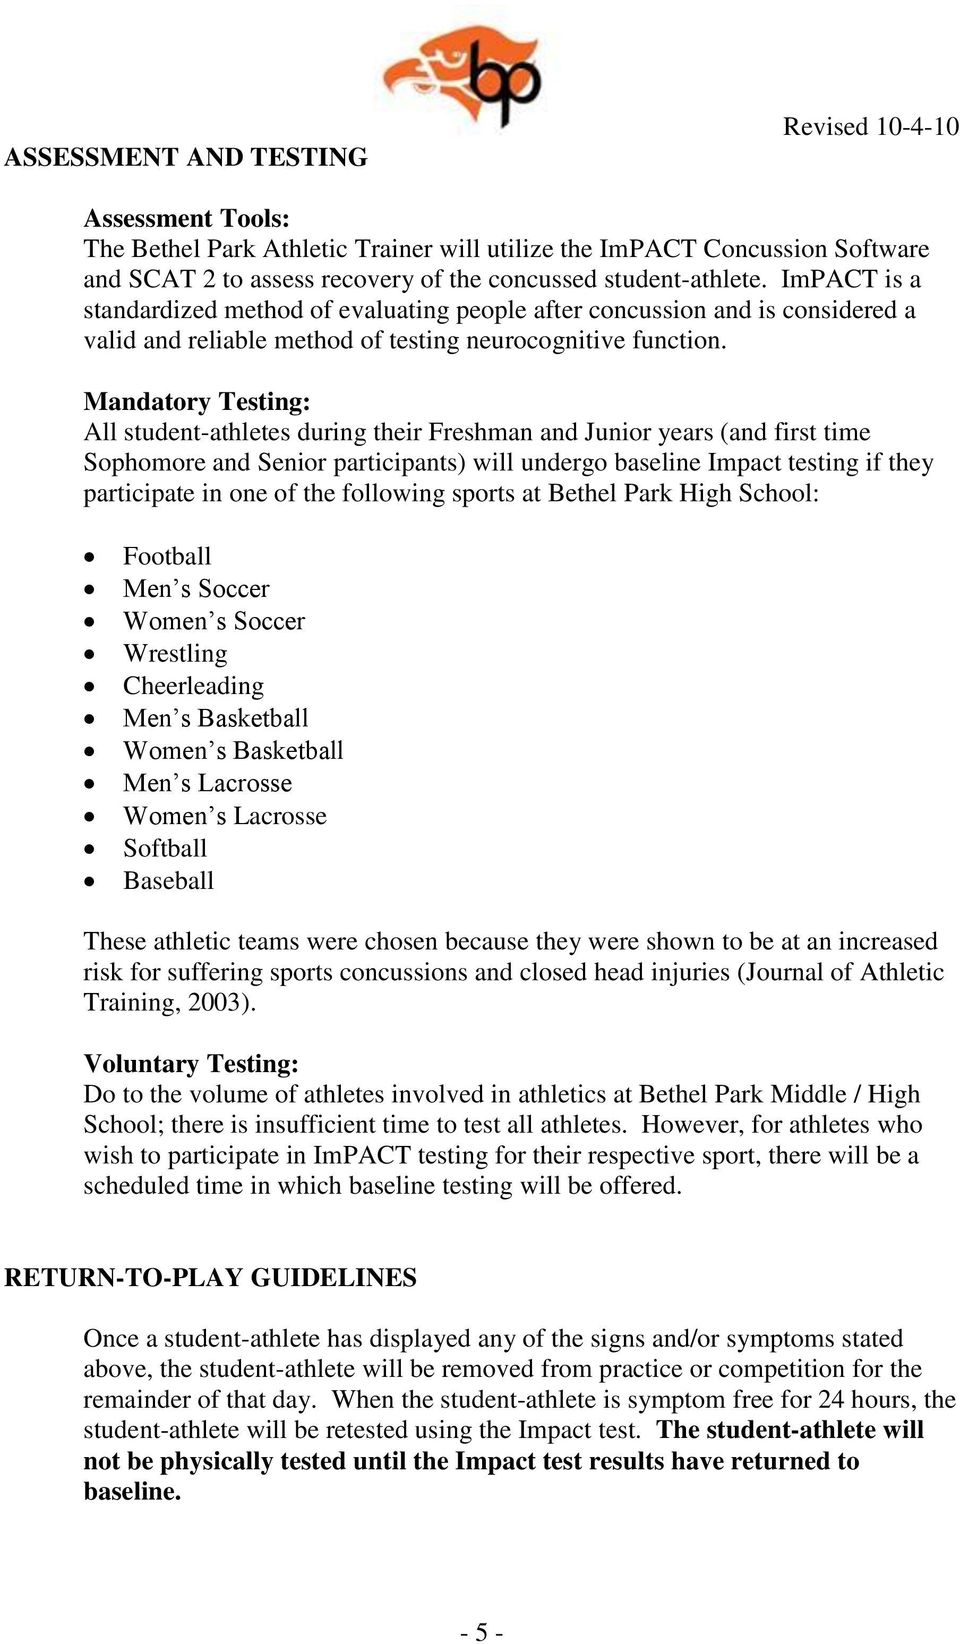 Mandatory Testing: All student-athletes during their Freshman and Junior years (and first time Sophomore and Senior participants) will undergo baseline Impact testing if they participate in one of